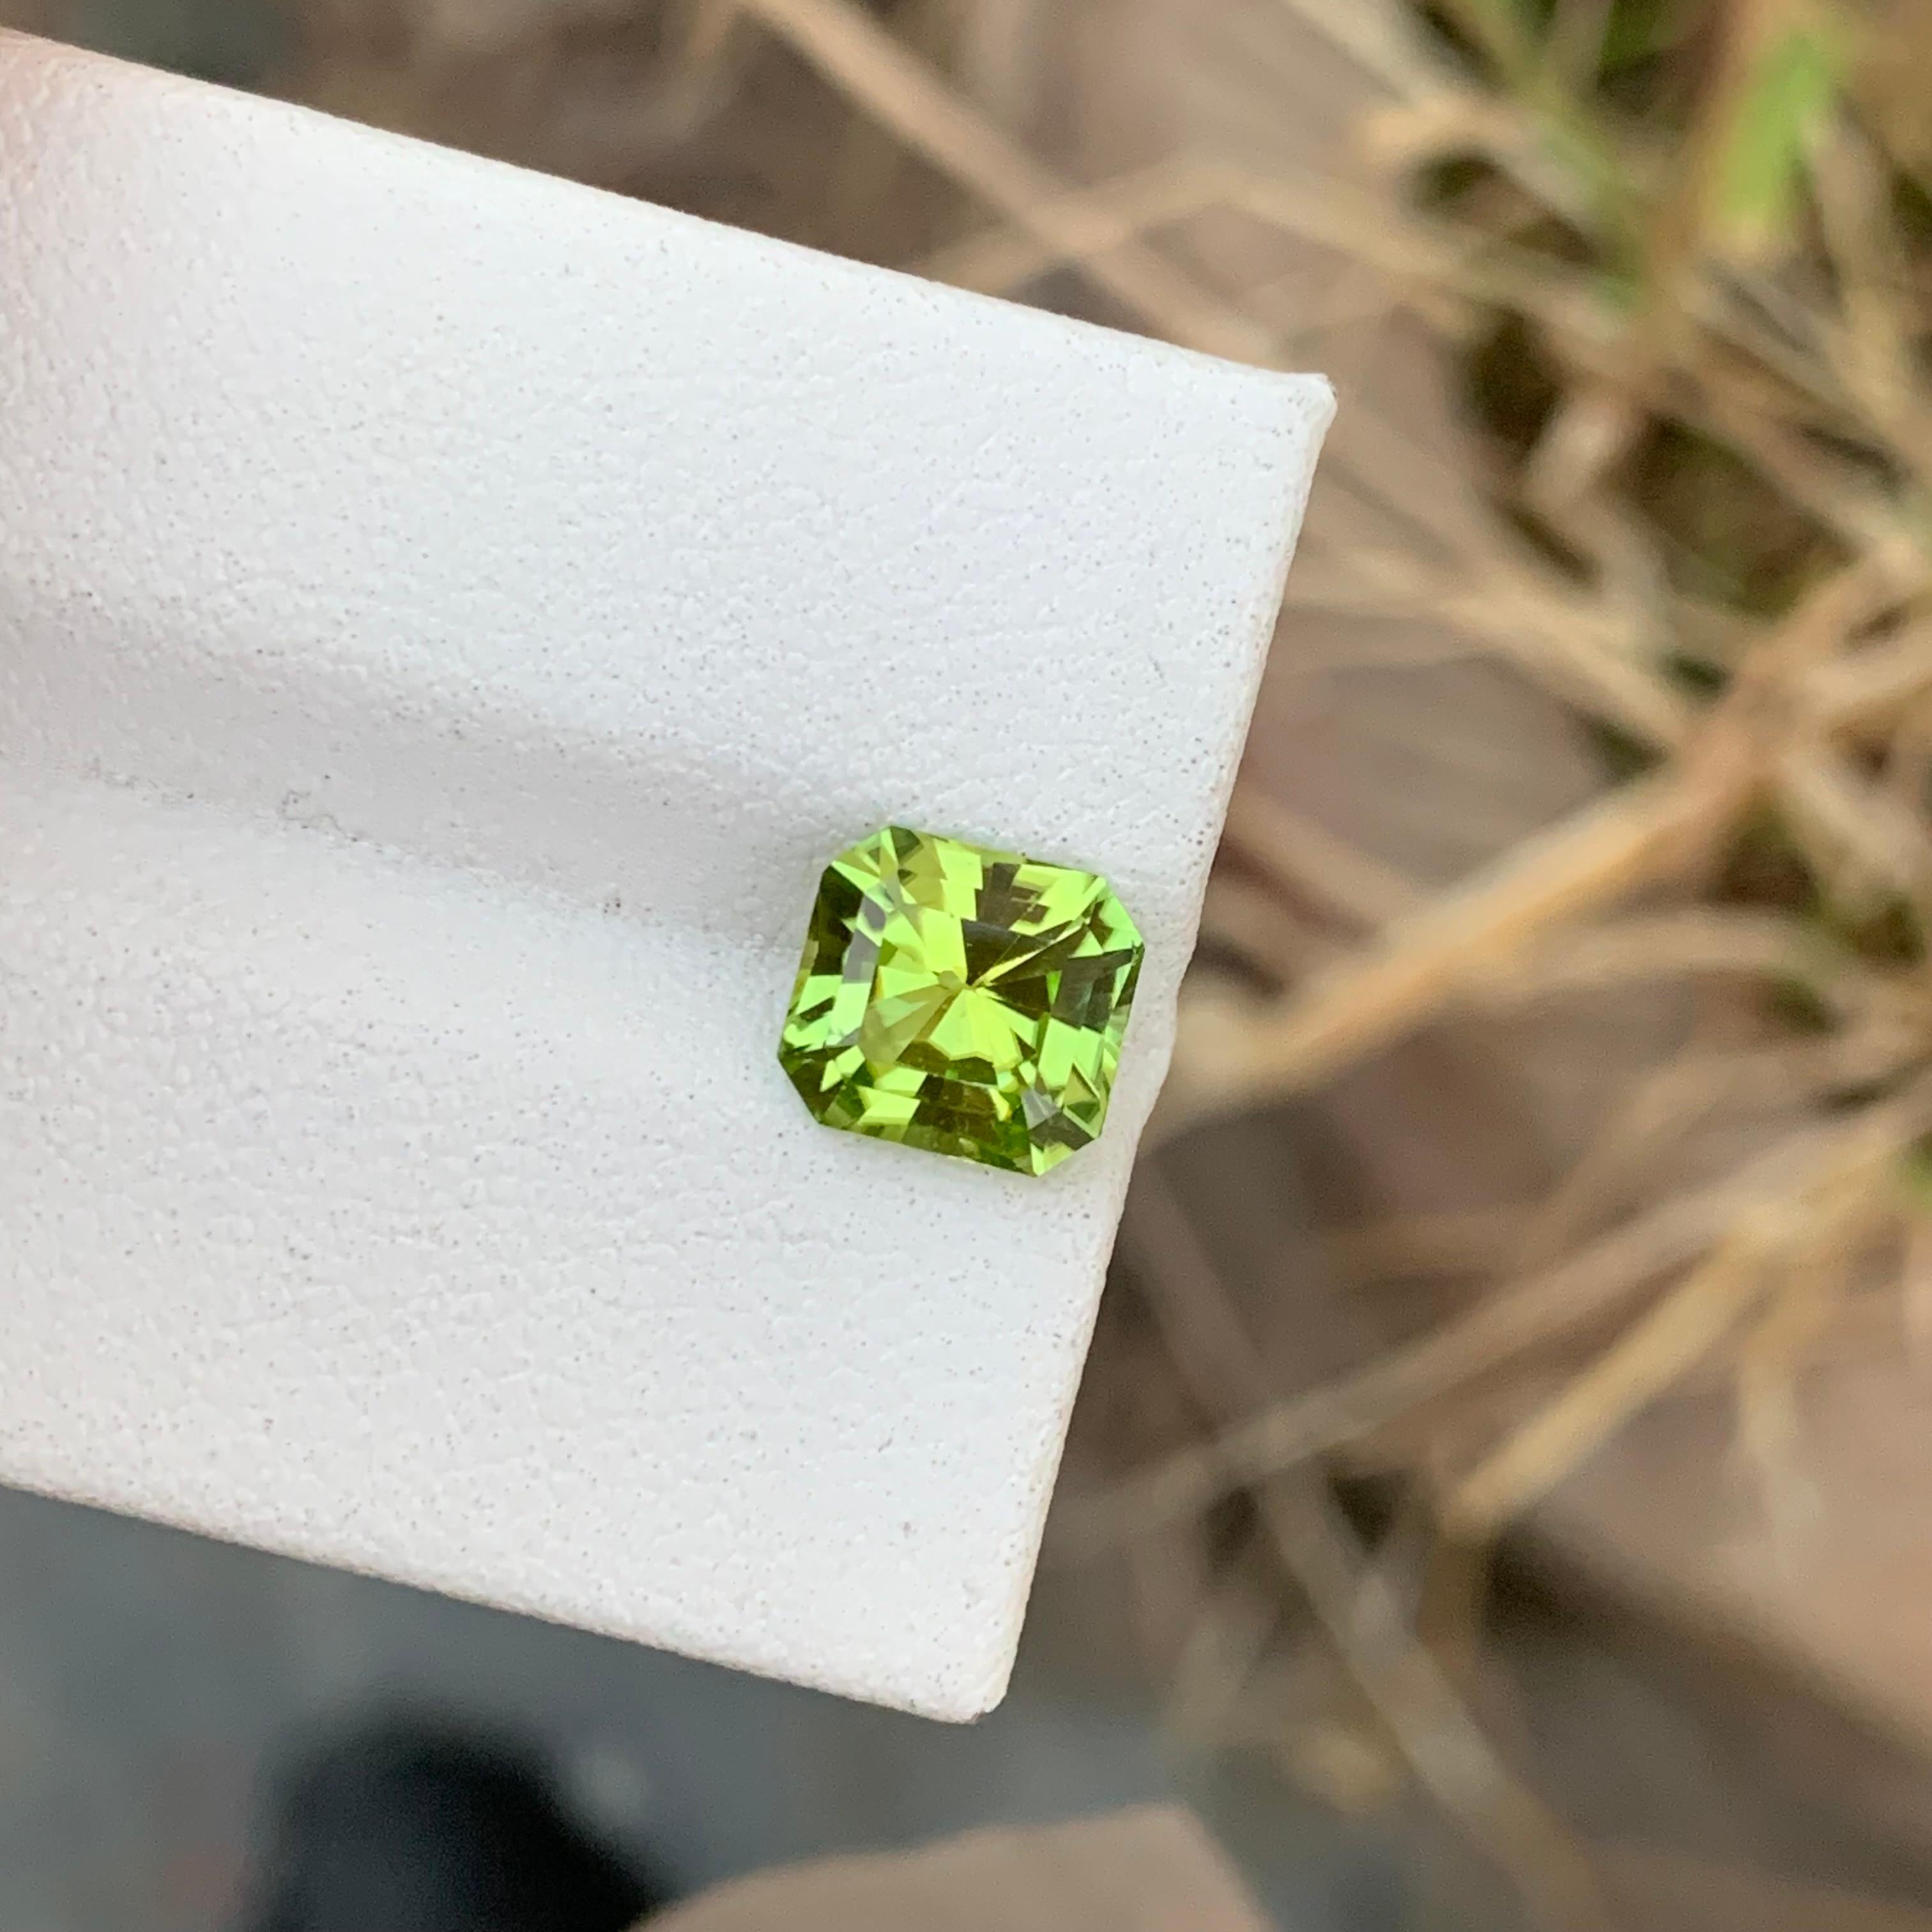 2.10 Carat Natural Loose Peridot Emerald Shape Gem From Earth Mine  For Sale 3